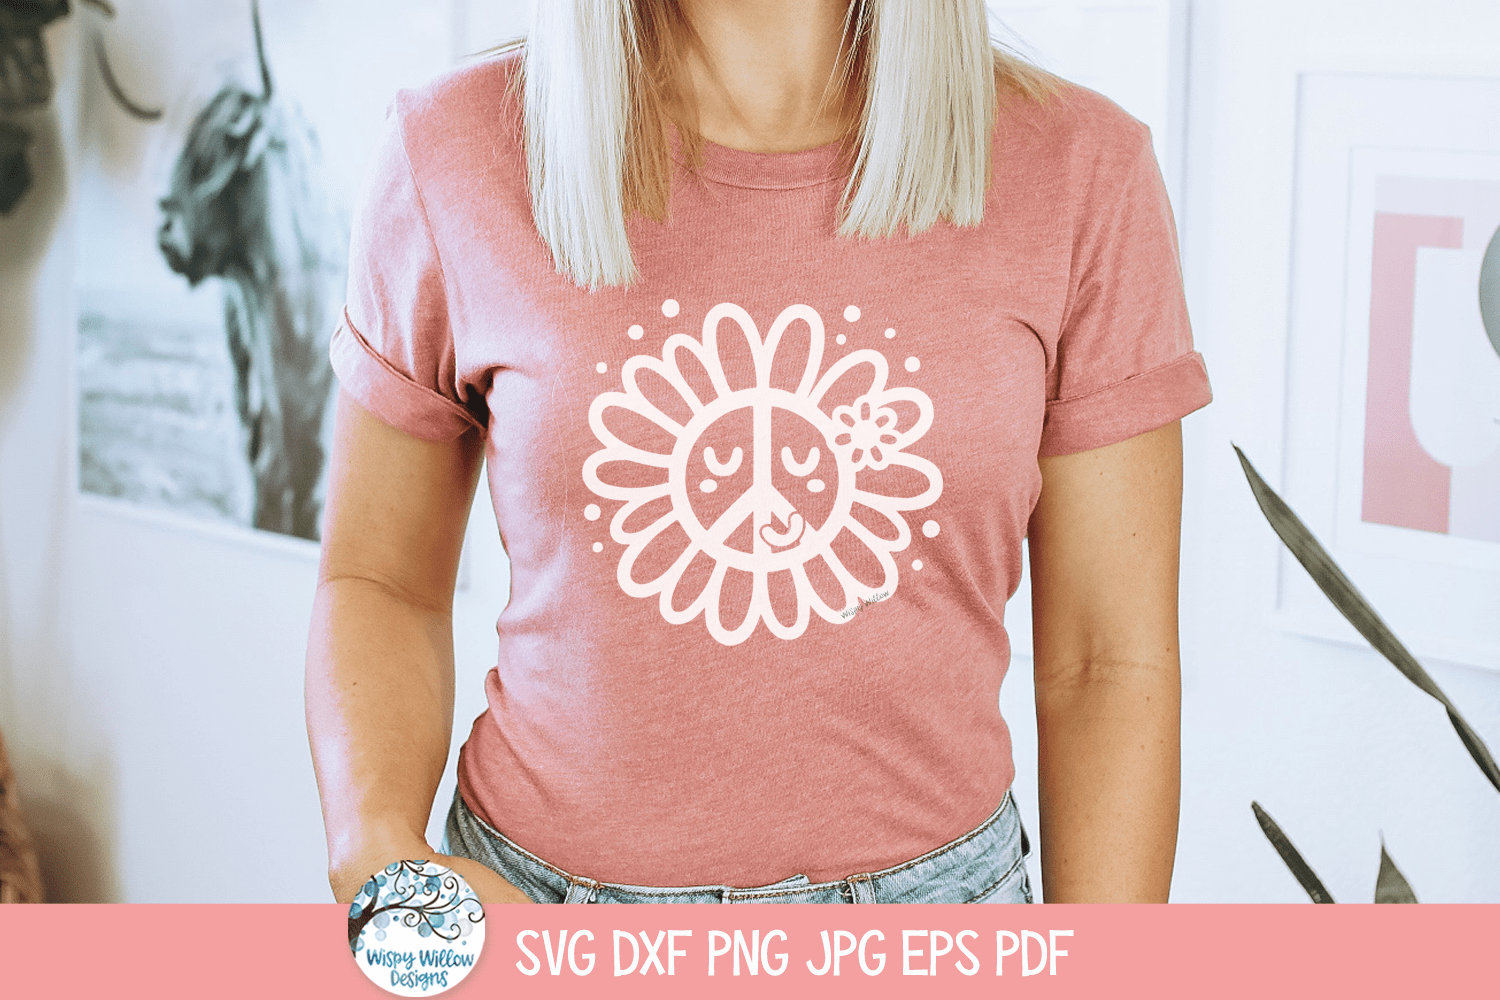 Flower Peace Sign SVG | Boho Chic Peace Flower Shirt Wispy Willow Designs Company